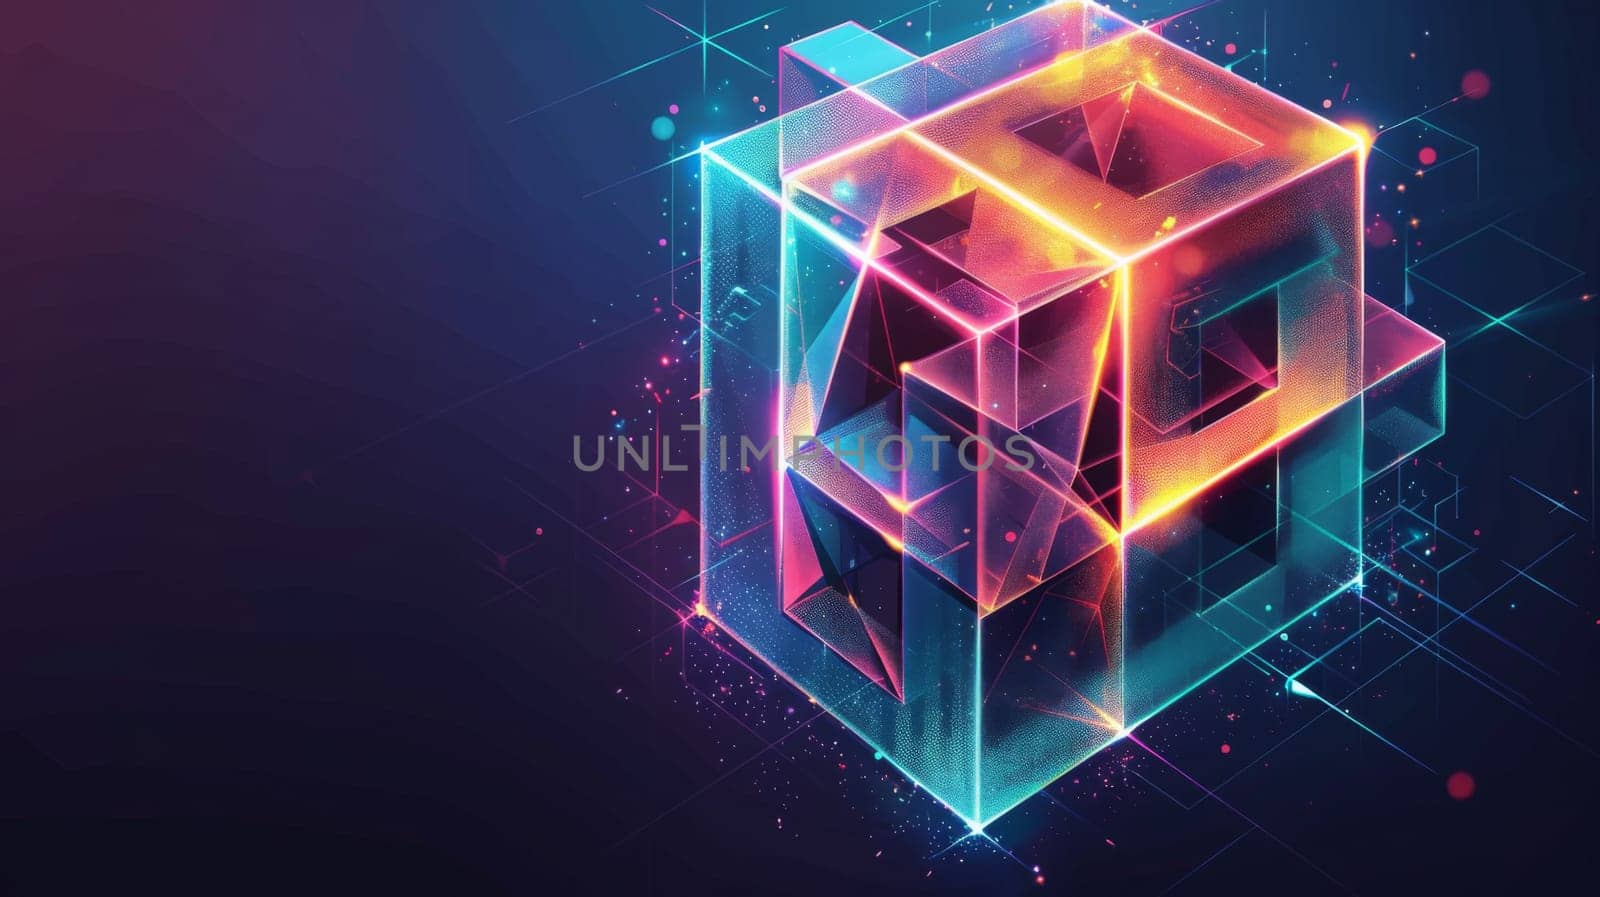 A colorful abstract image of a cube with neon lights